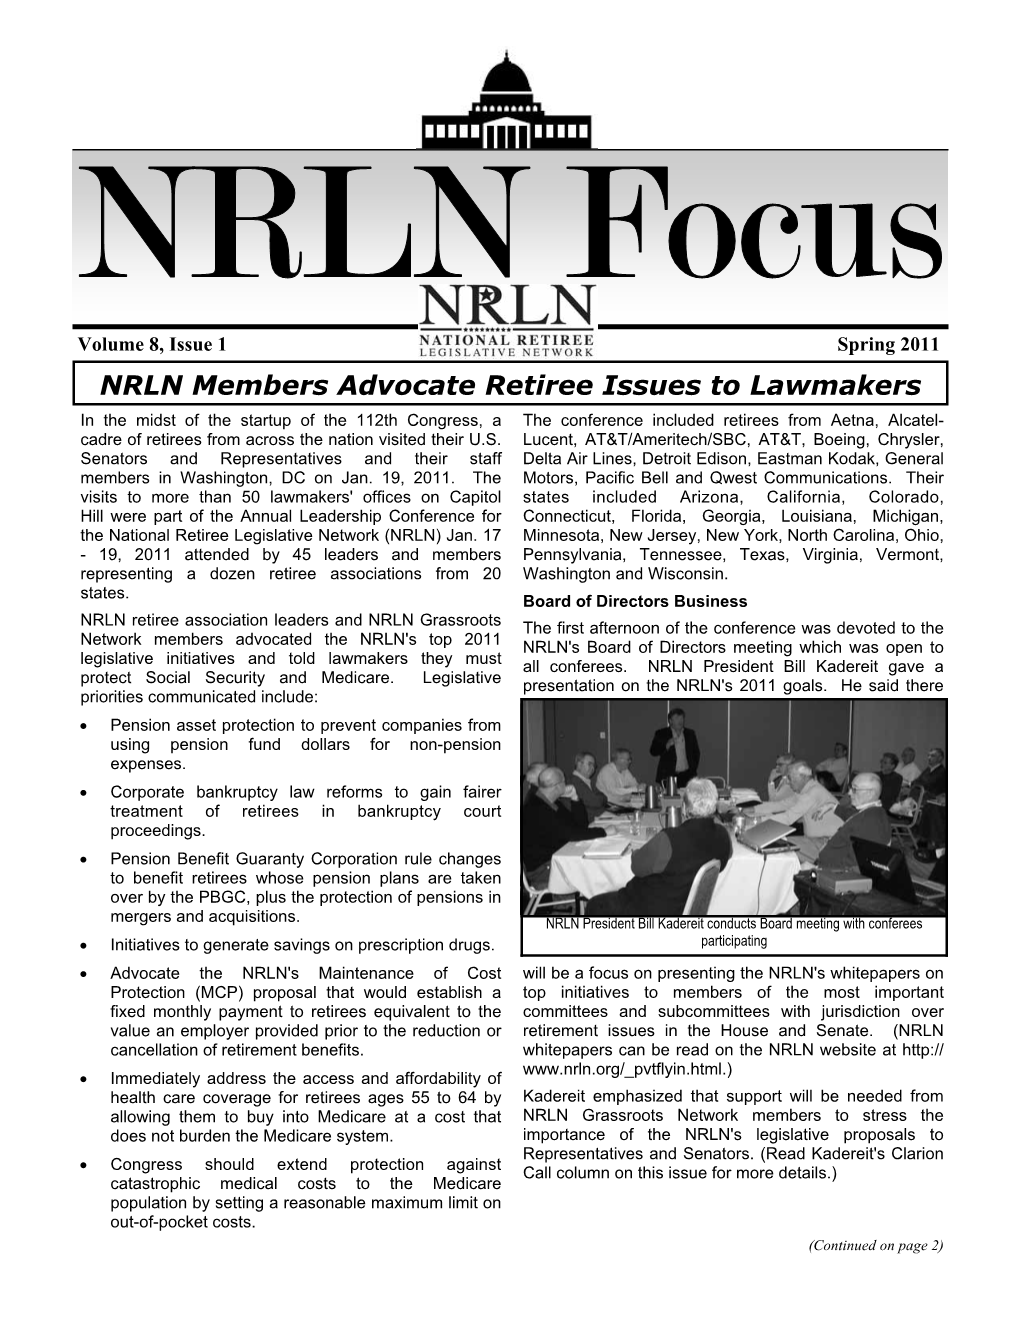 NRLN Members Advocate Retiree Issues to Lawmakers